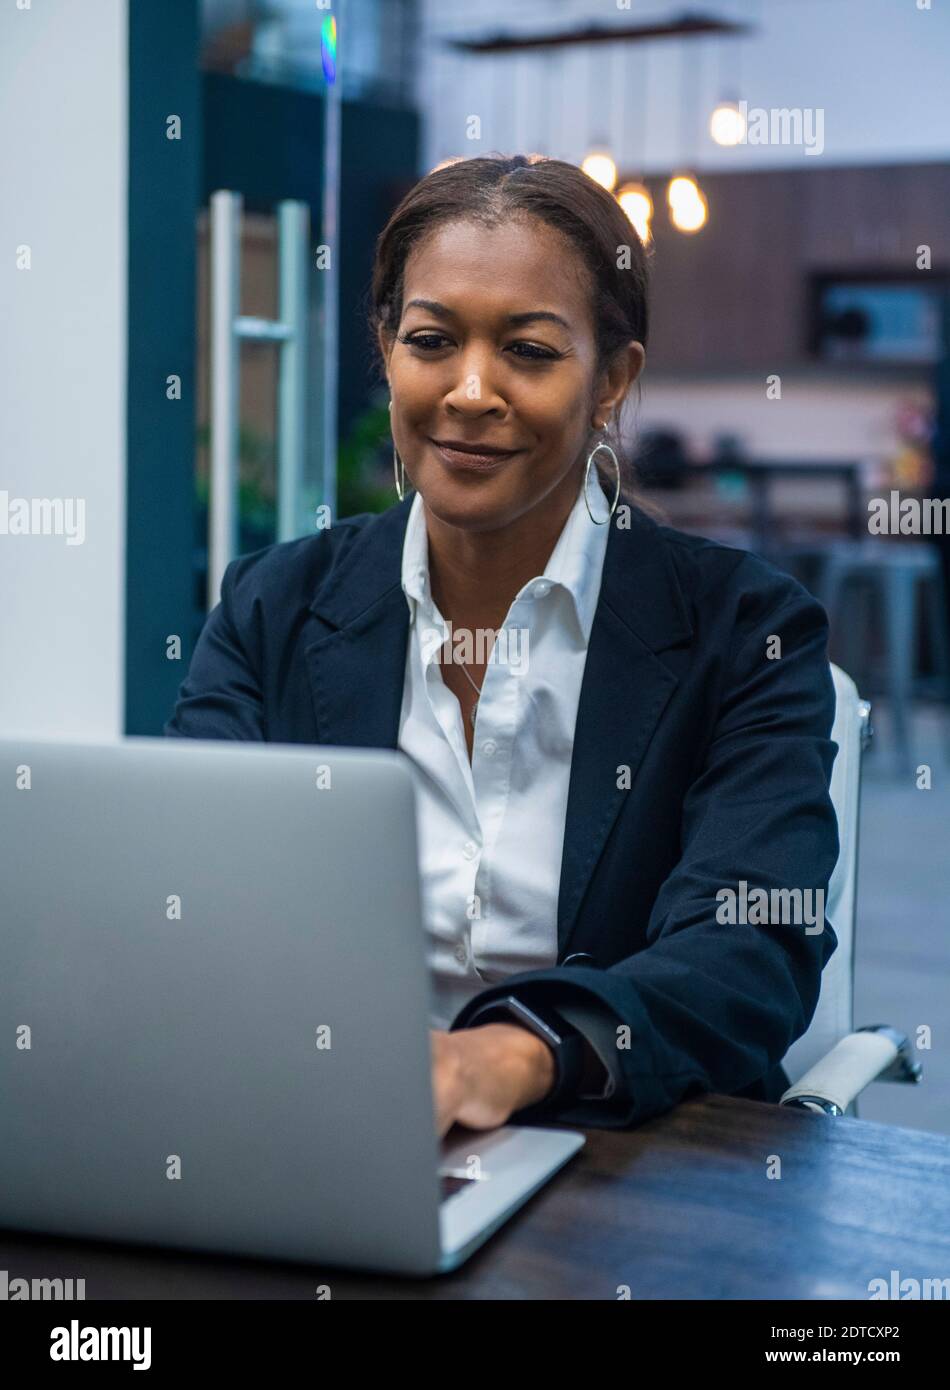 Smiling businesswoman working on laptop at desk in office Banque D'Images